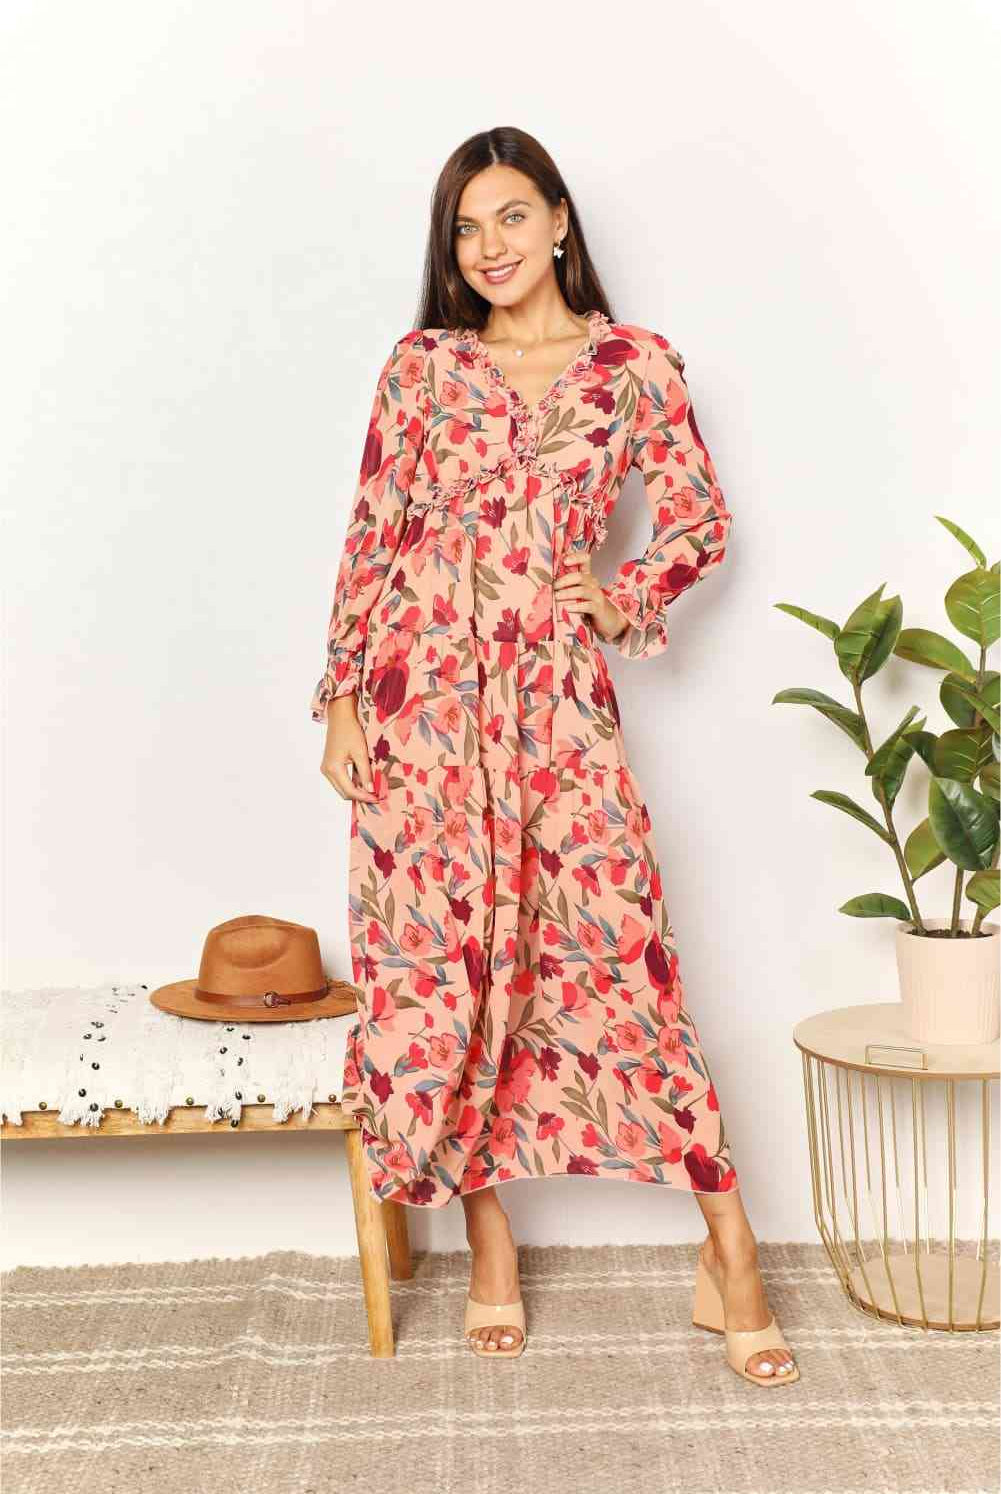 Ivy Reina United States Floral S undefined undefined